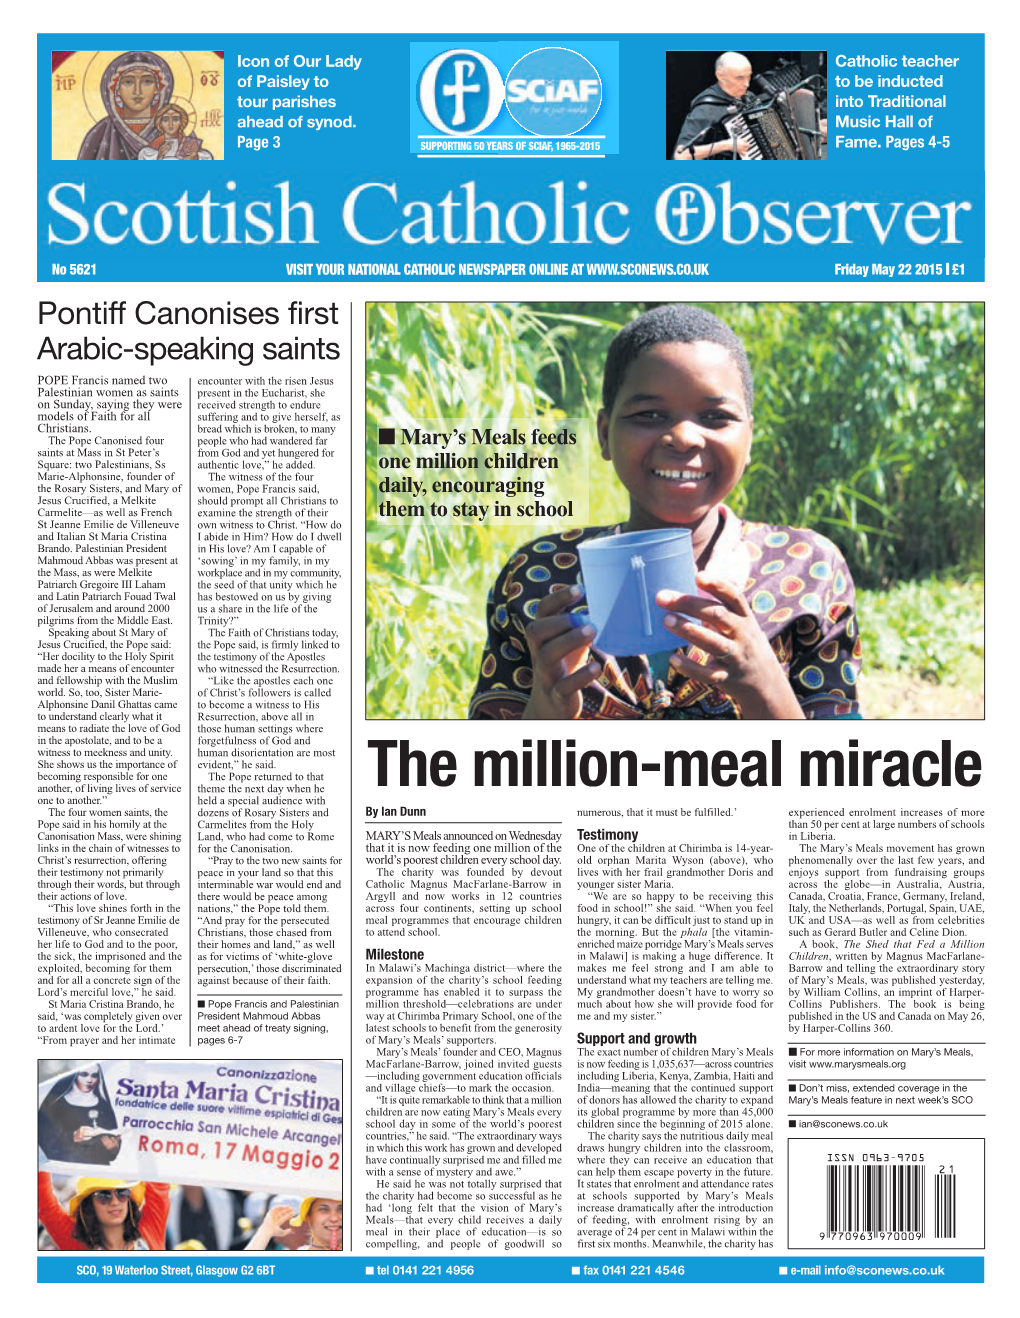 The Million-Meal Miracle